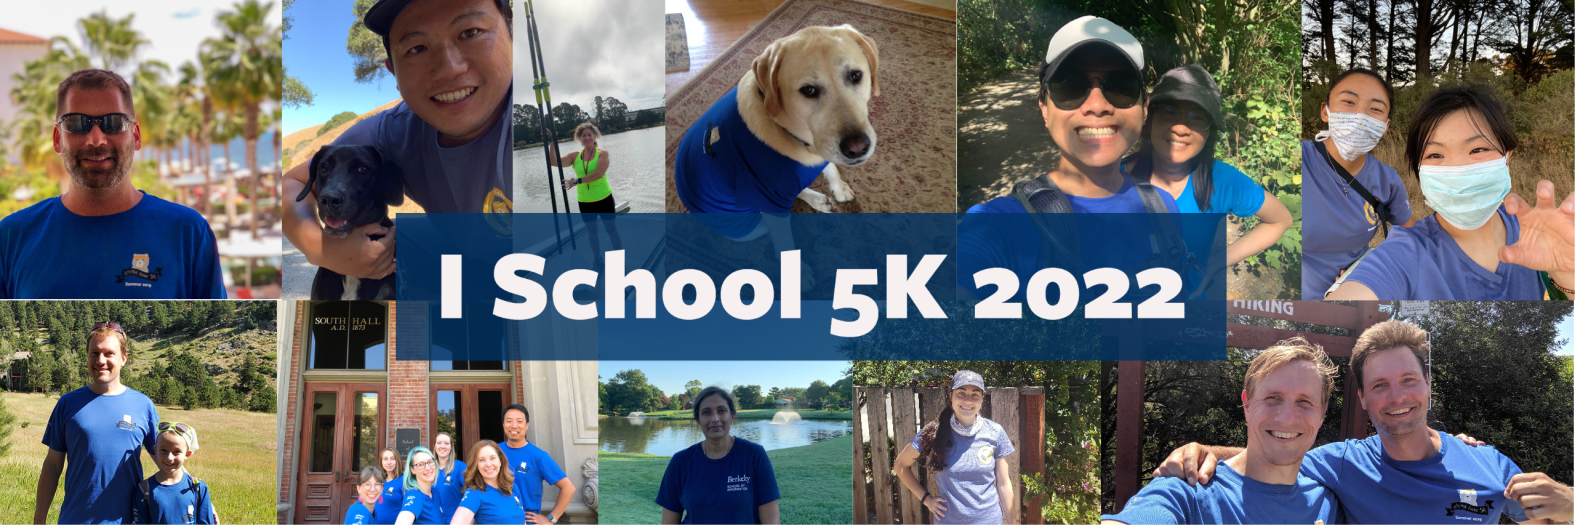 collage of images from past I School 5Ks with text: "I School 5K 2022"